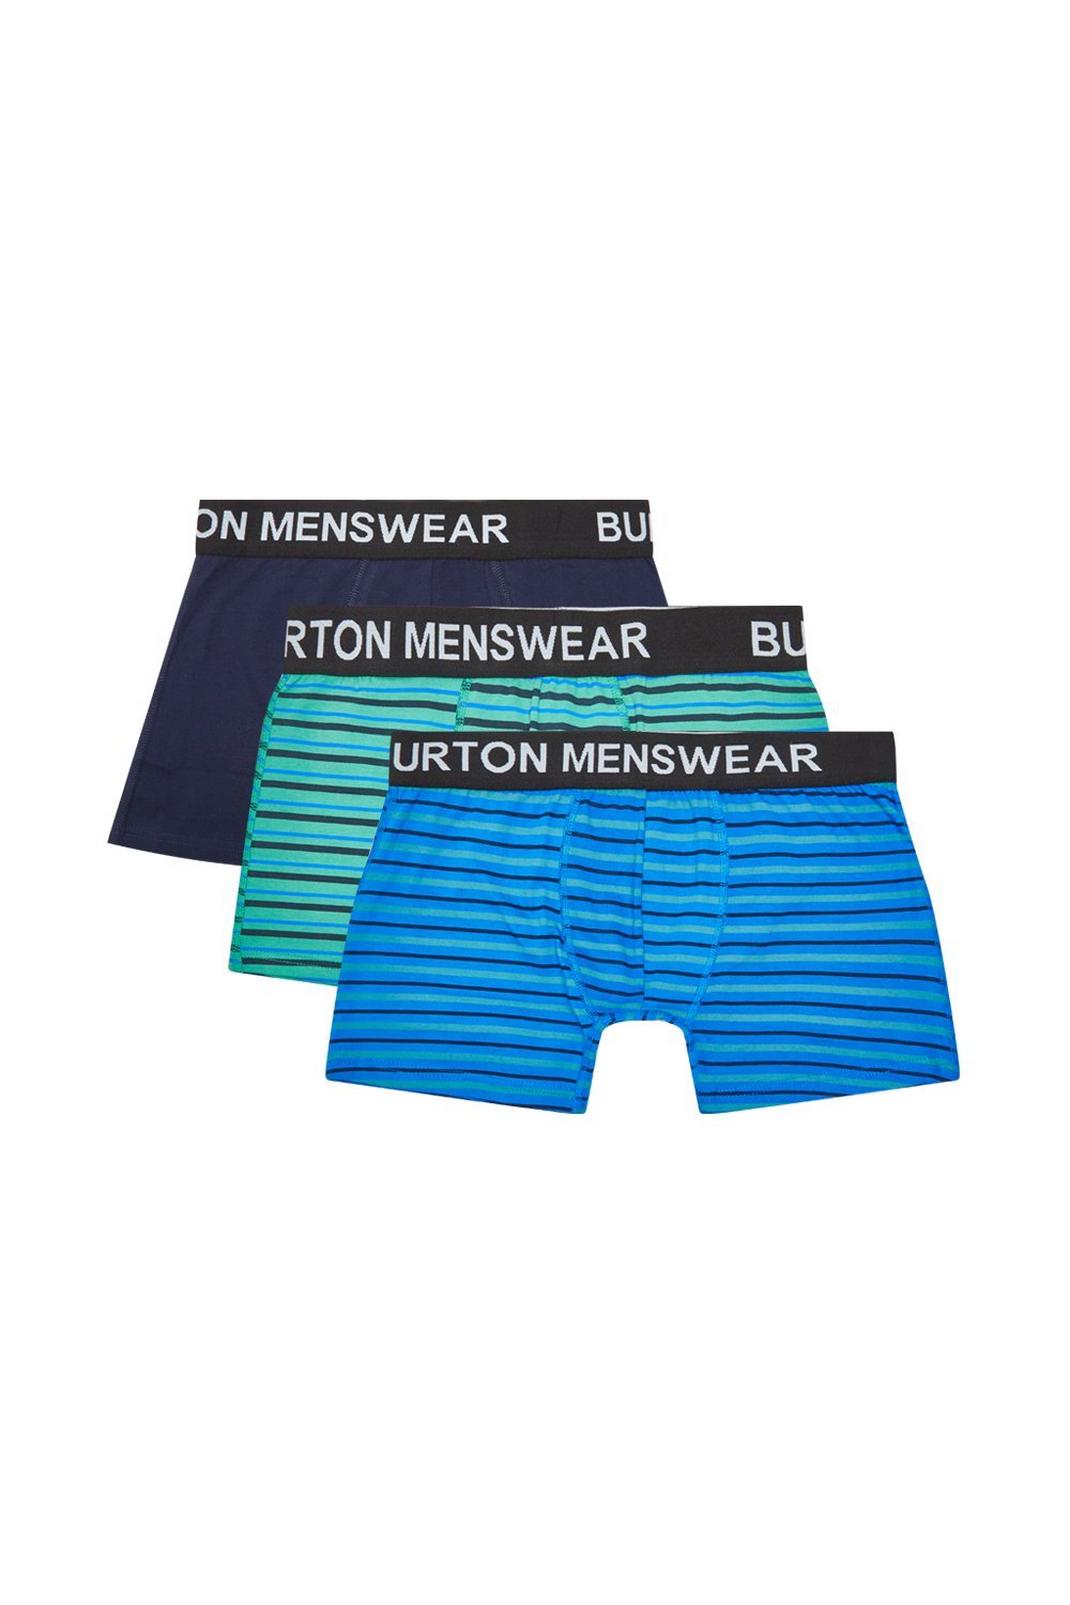 Plus Grey Blue Double Stripe Trunks image number 1